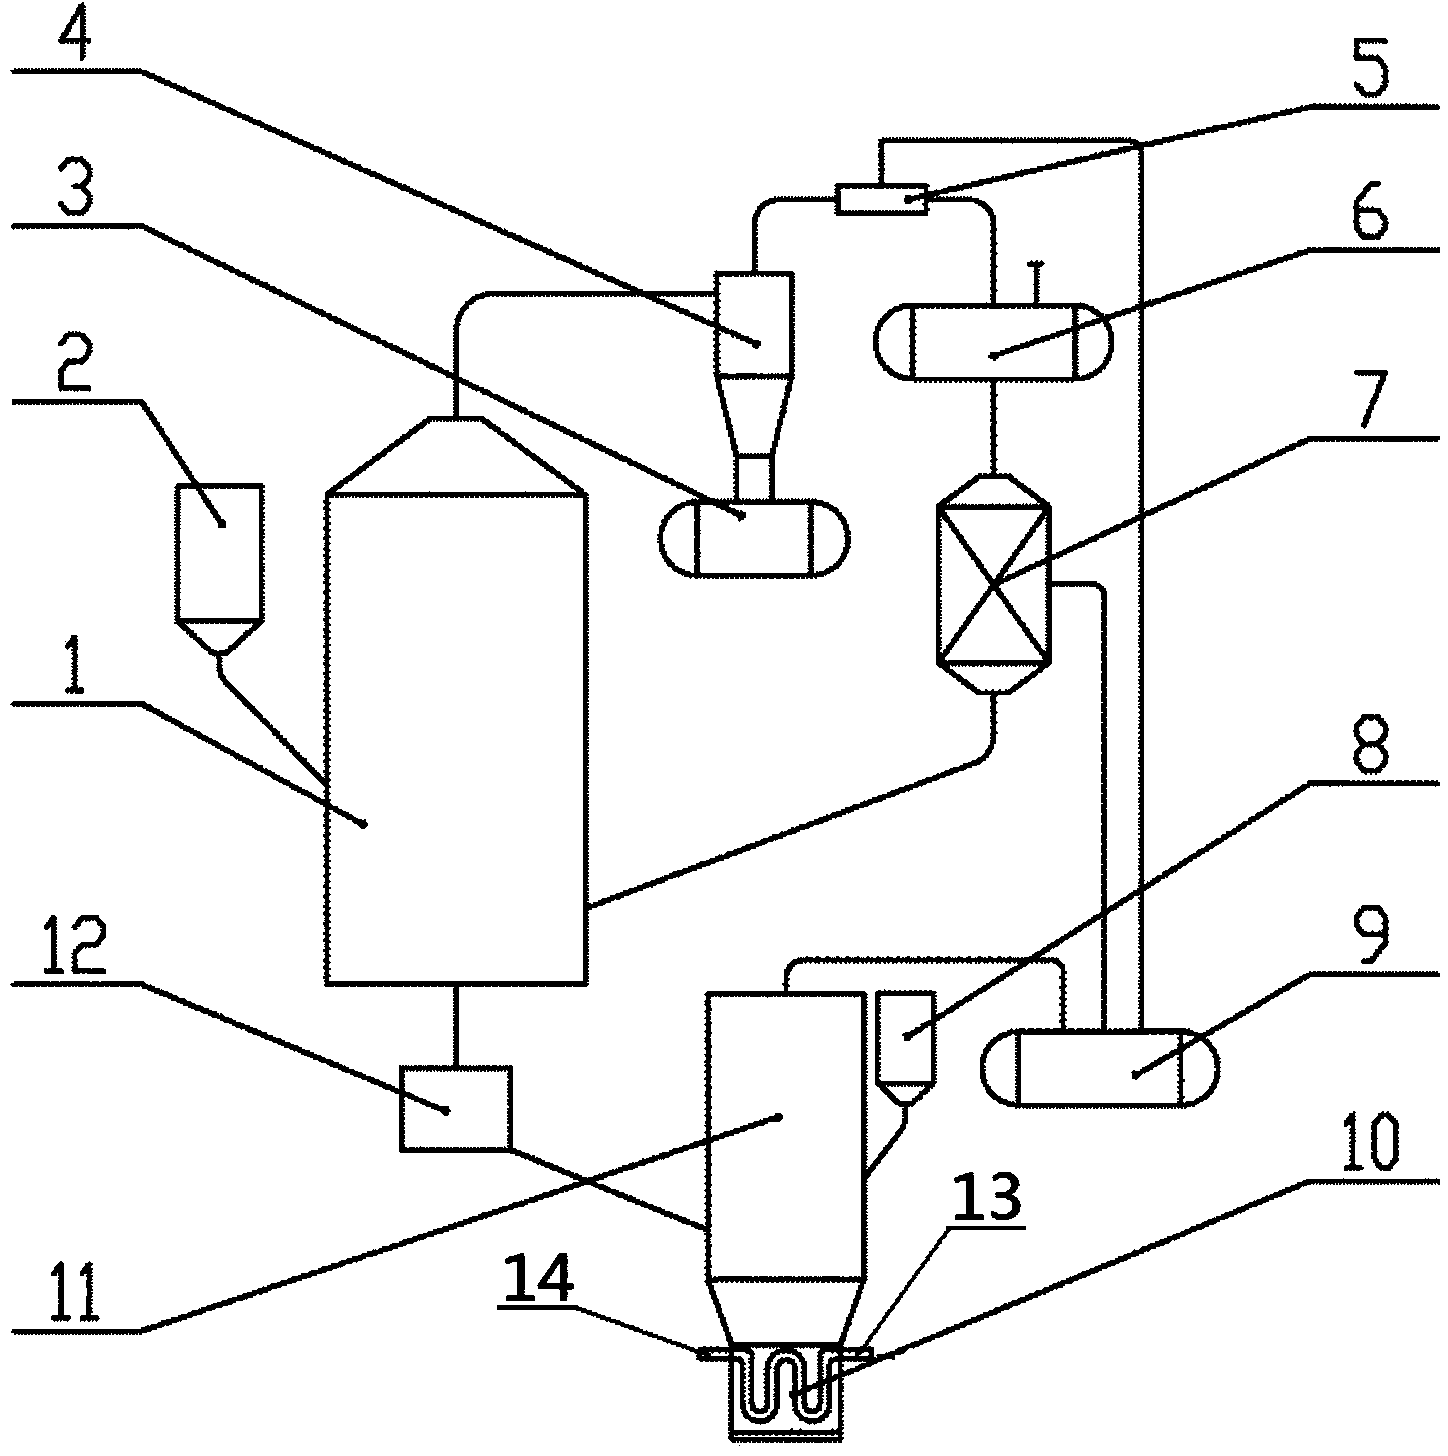 System and process for producing oil by hydrotorting oil shale under increased pressure